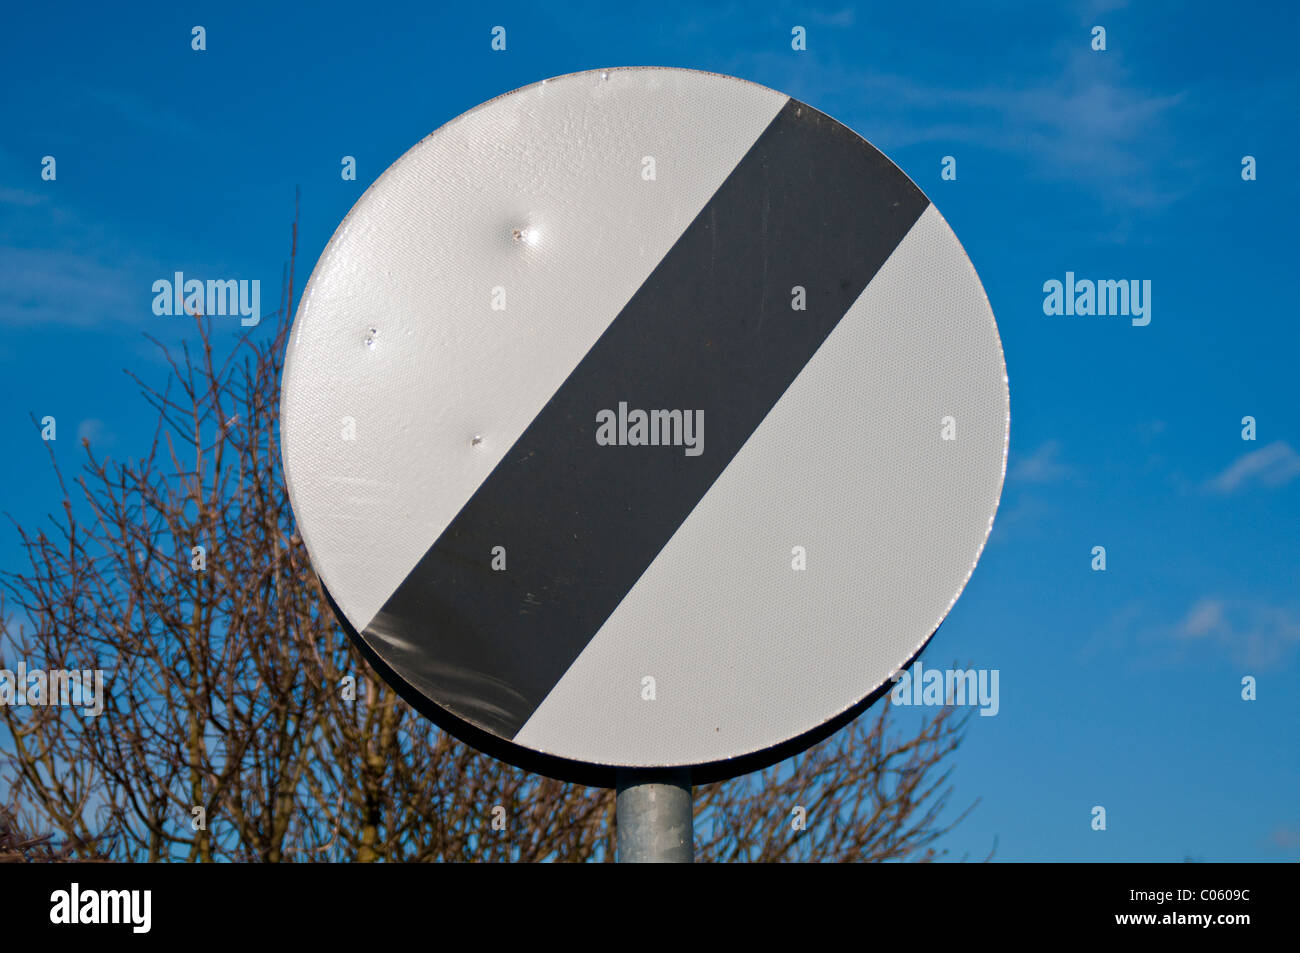 National speed limit road sign Stock Photo